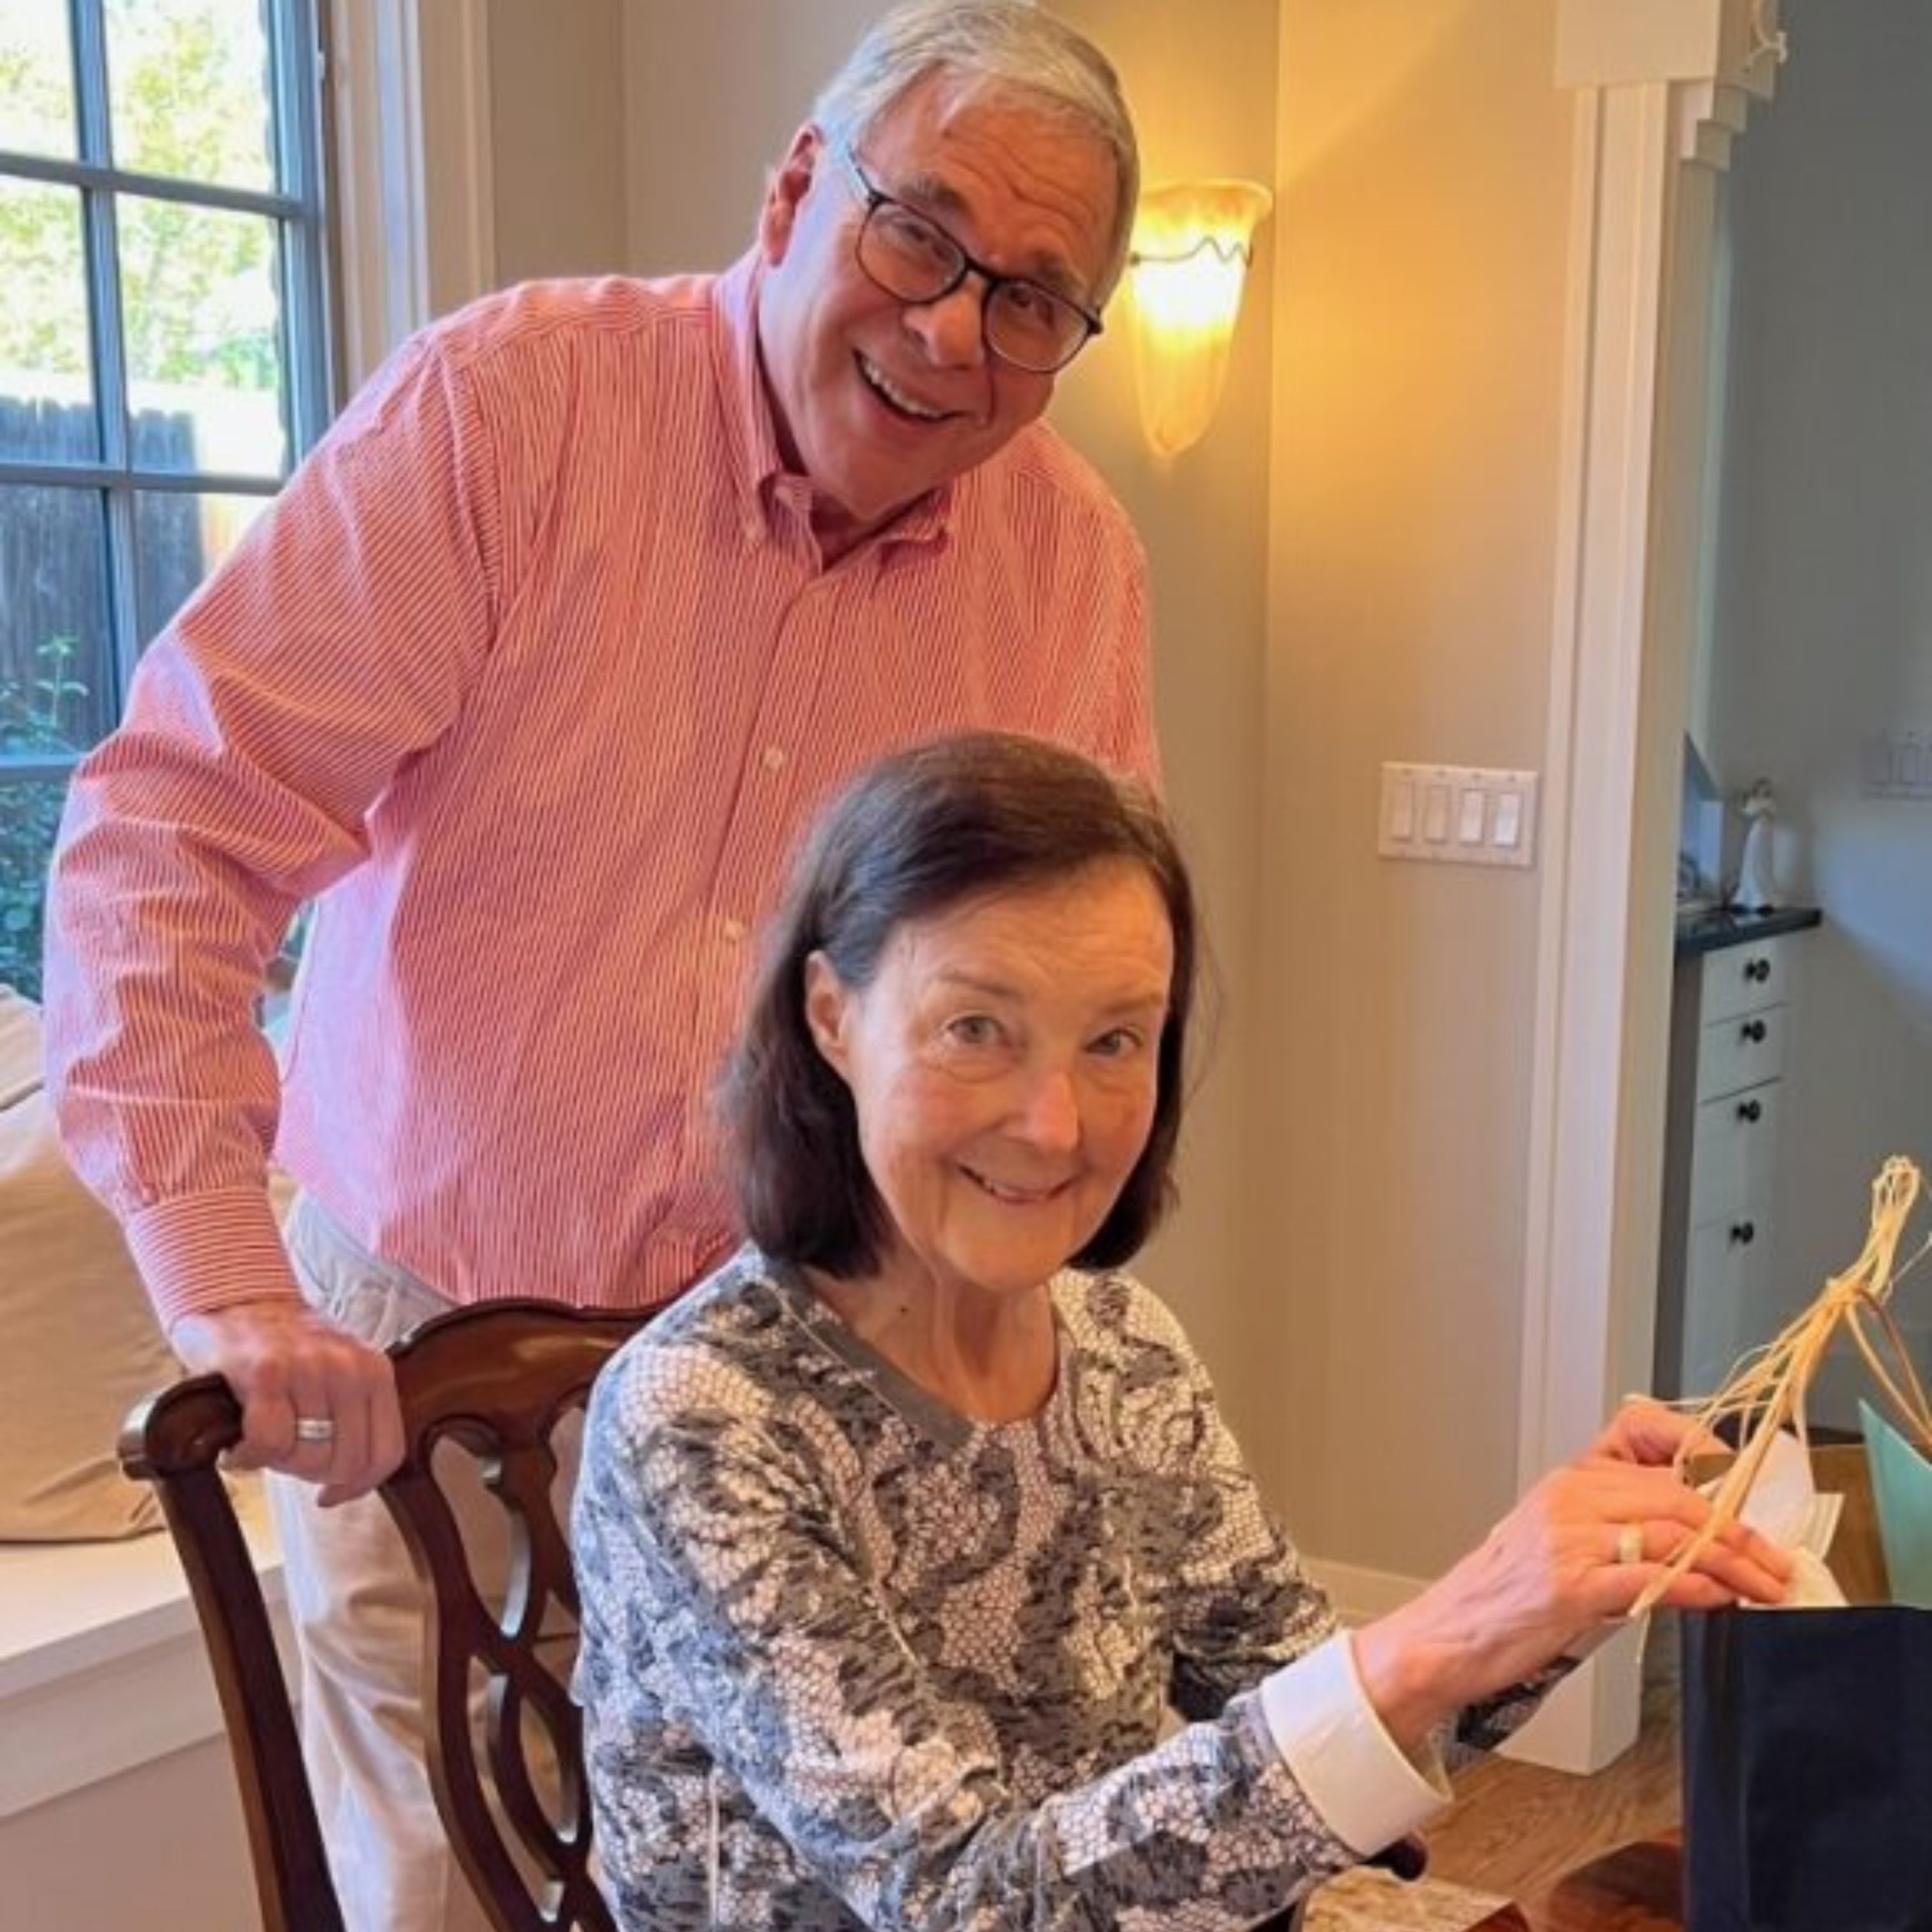 The late Dr. Mary Krugman smiles as she opens a gift while sitting in a chair, her husband, Dr. Dick Krugman, stands behind her.